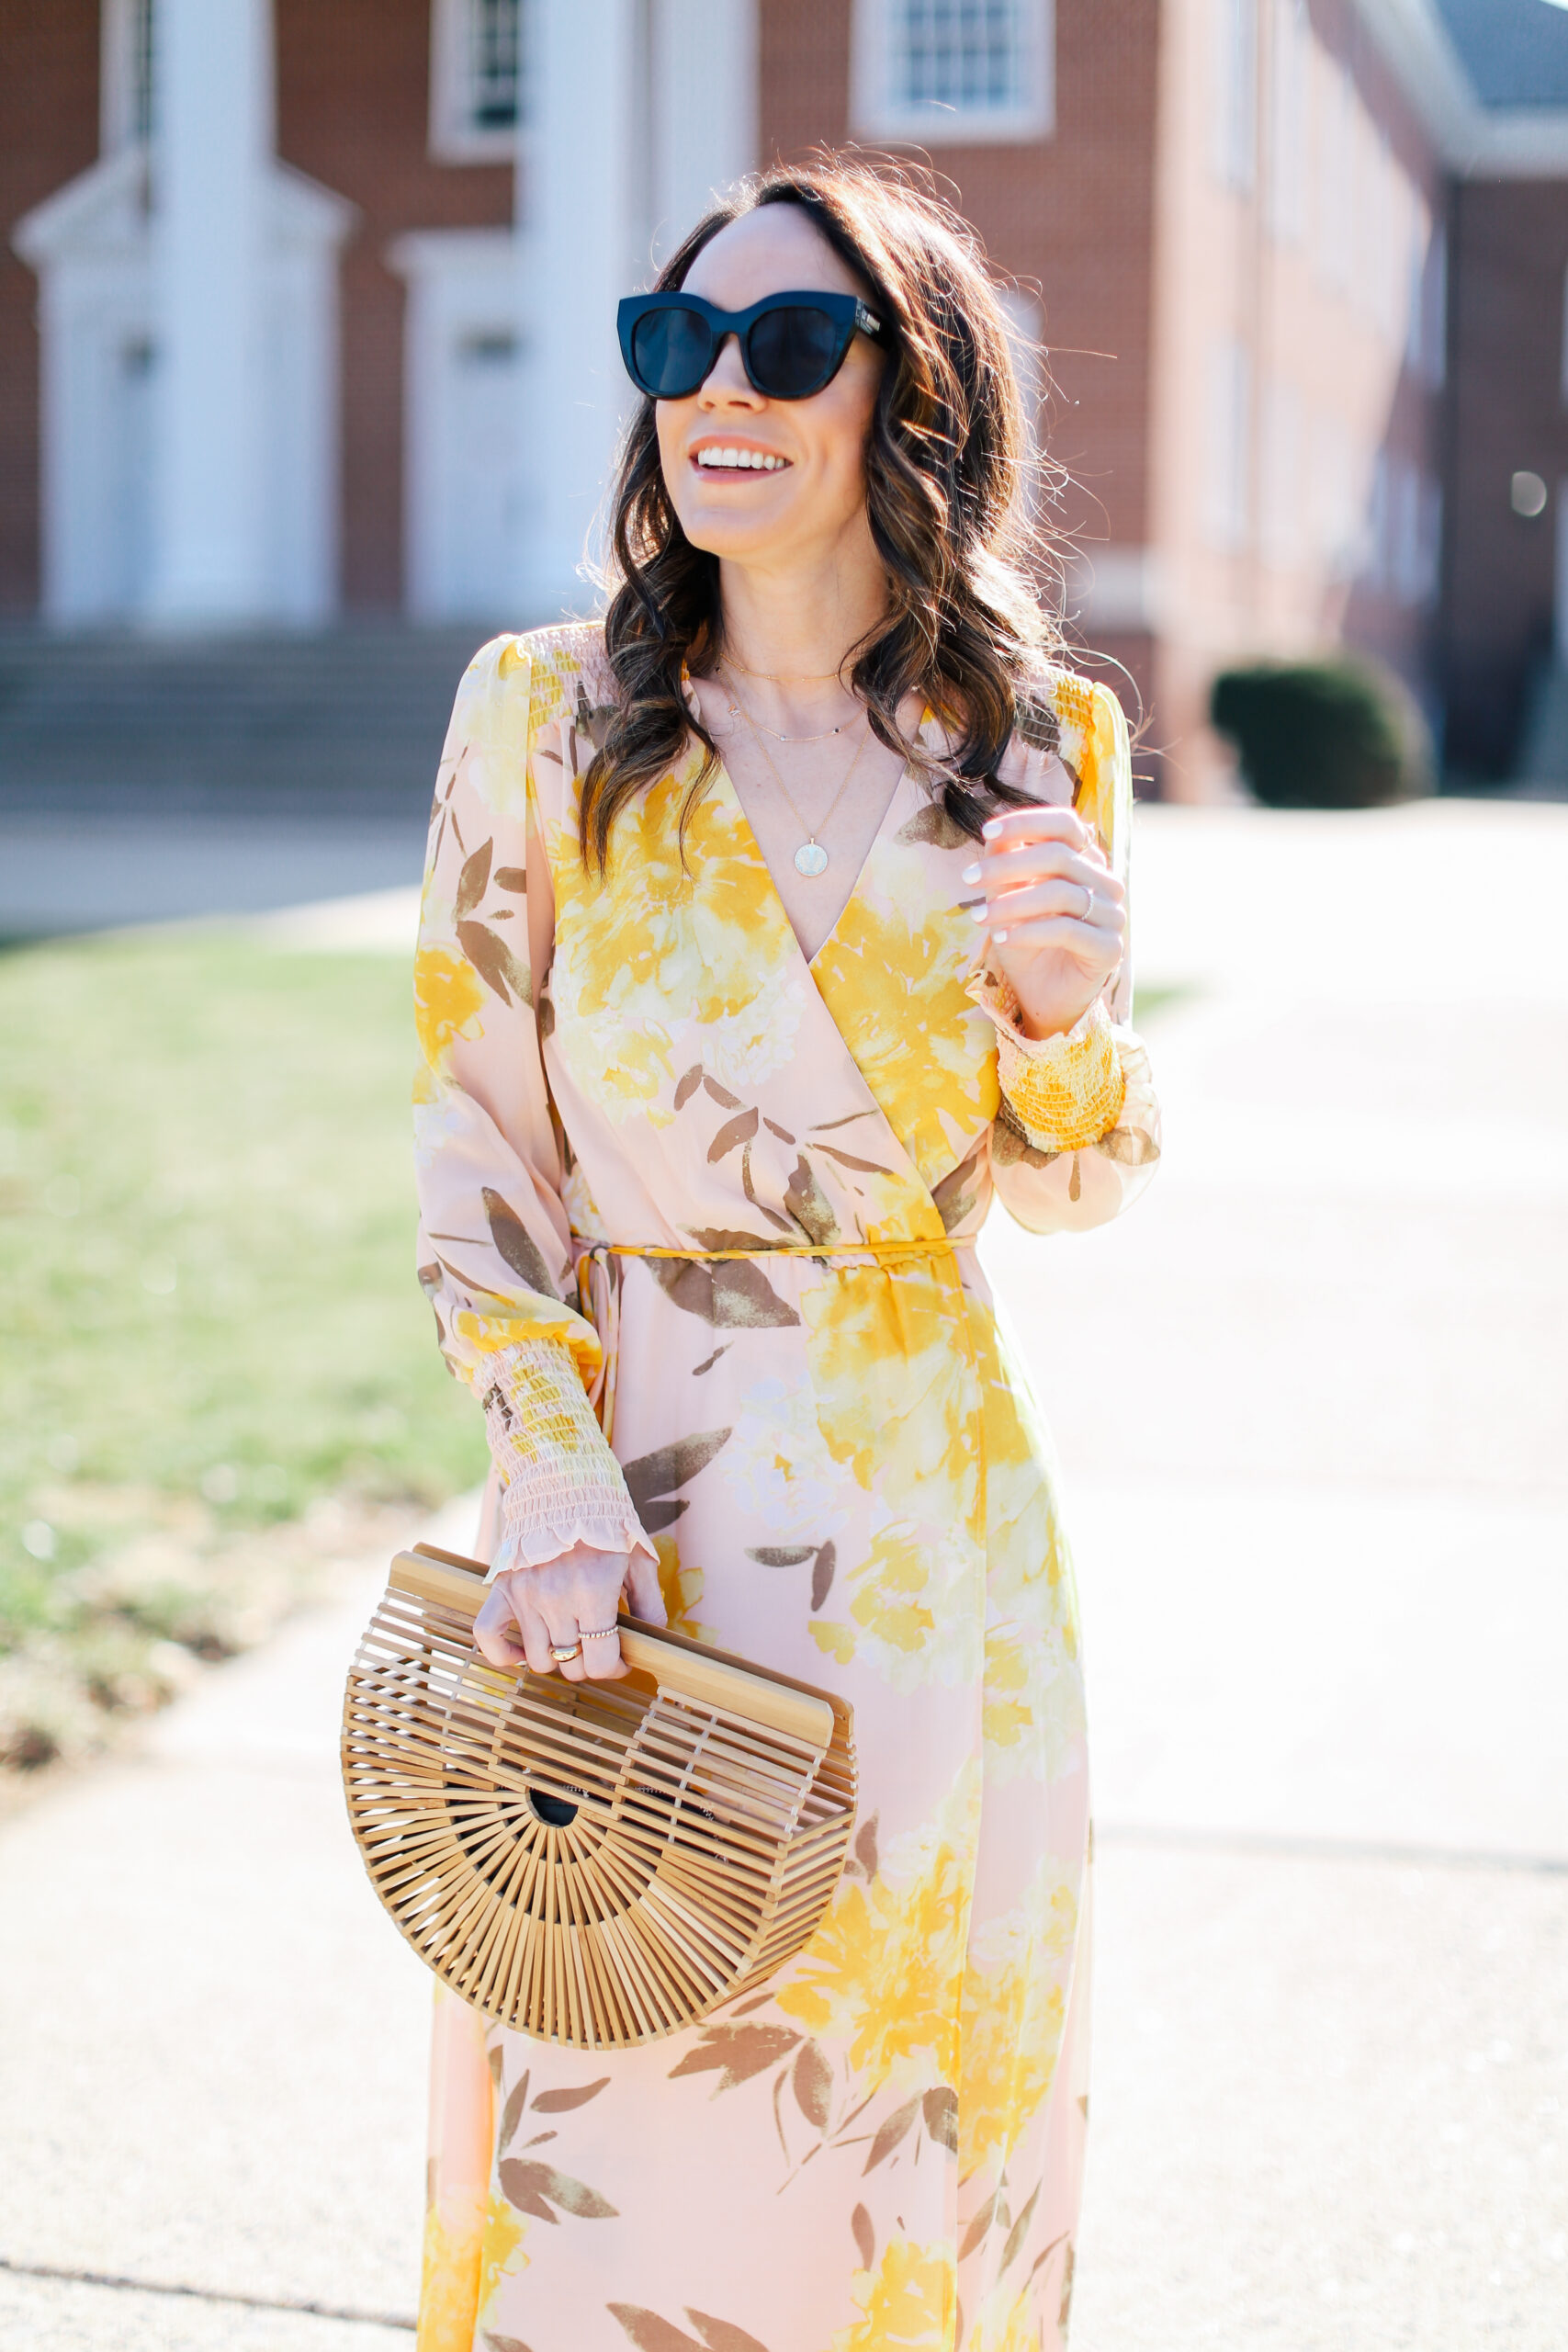 The Most Flattering Wrap Dress To Wear This Spring - alittlebitetc